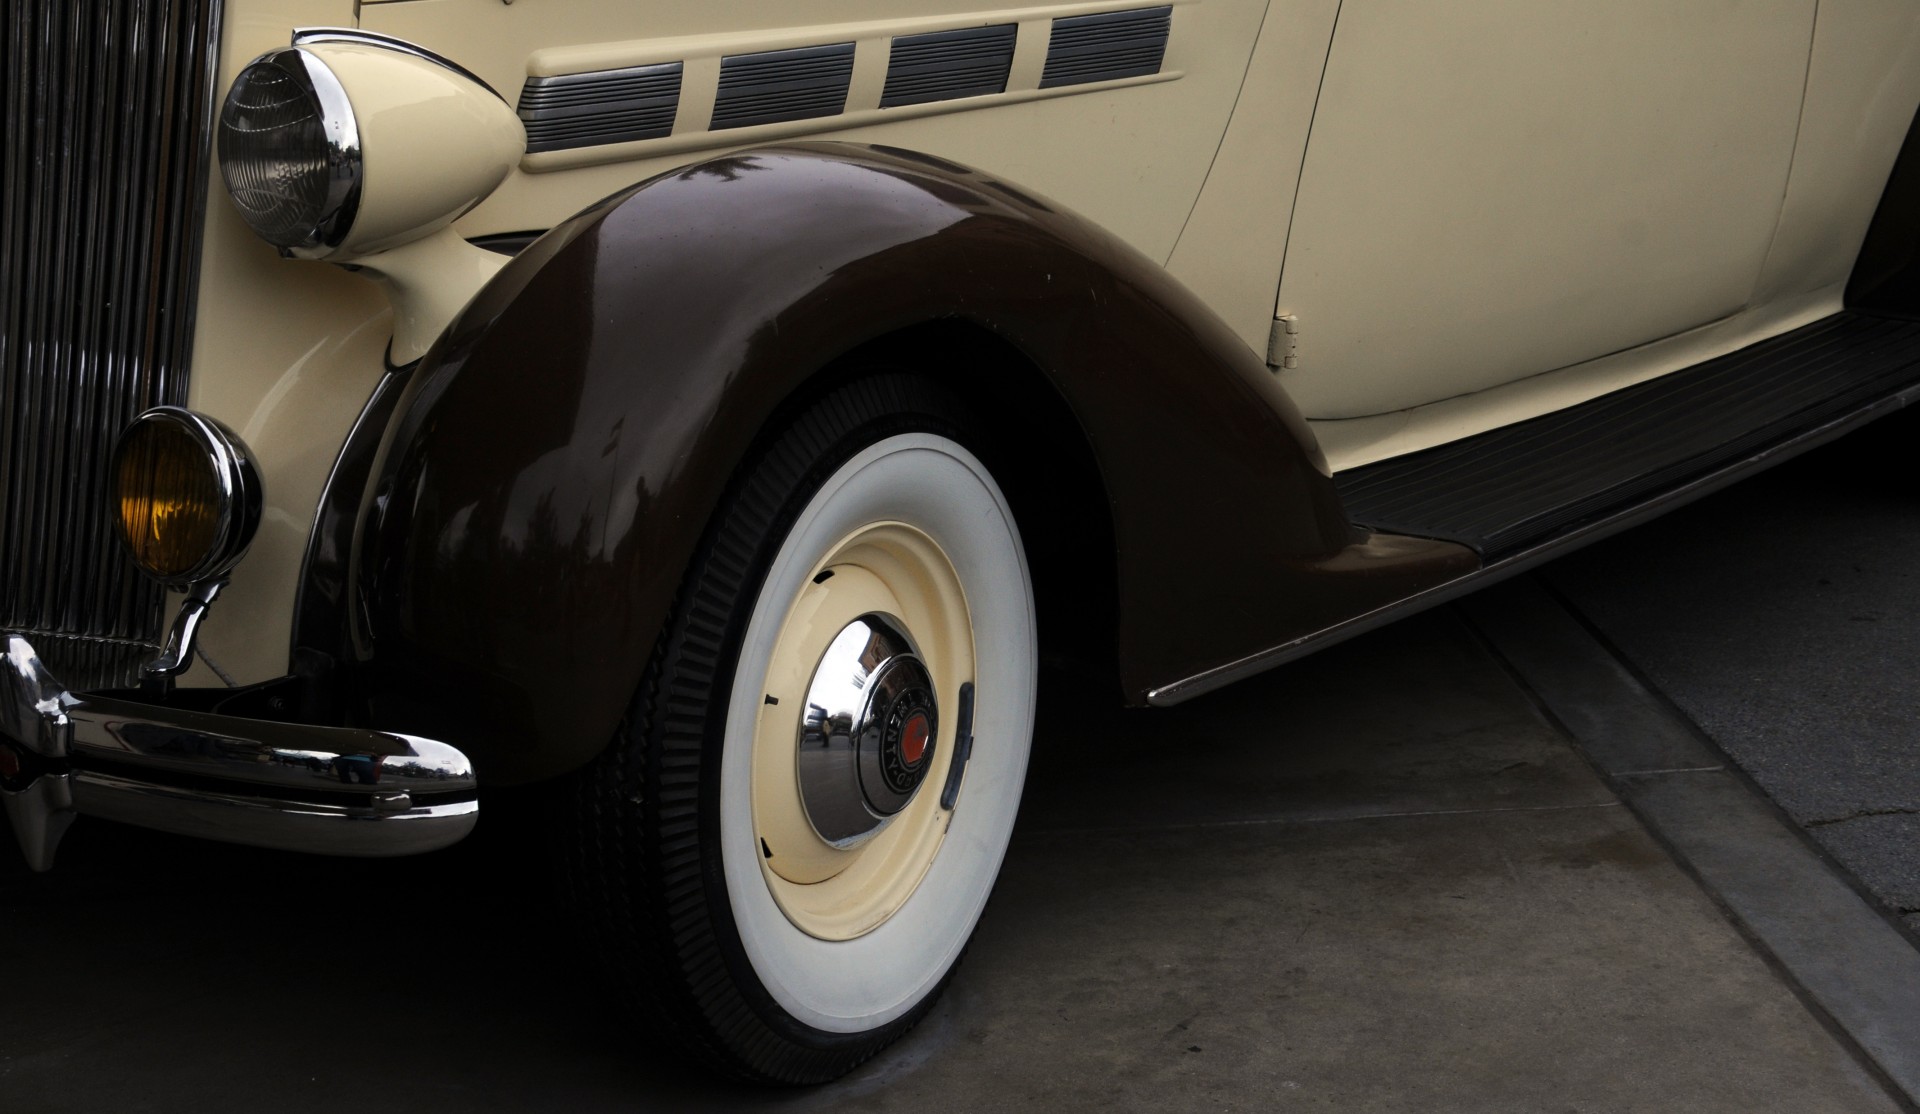 The right front side fender and whitewall tire of an old Packard car